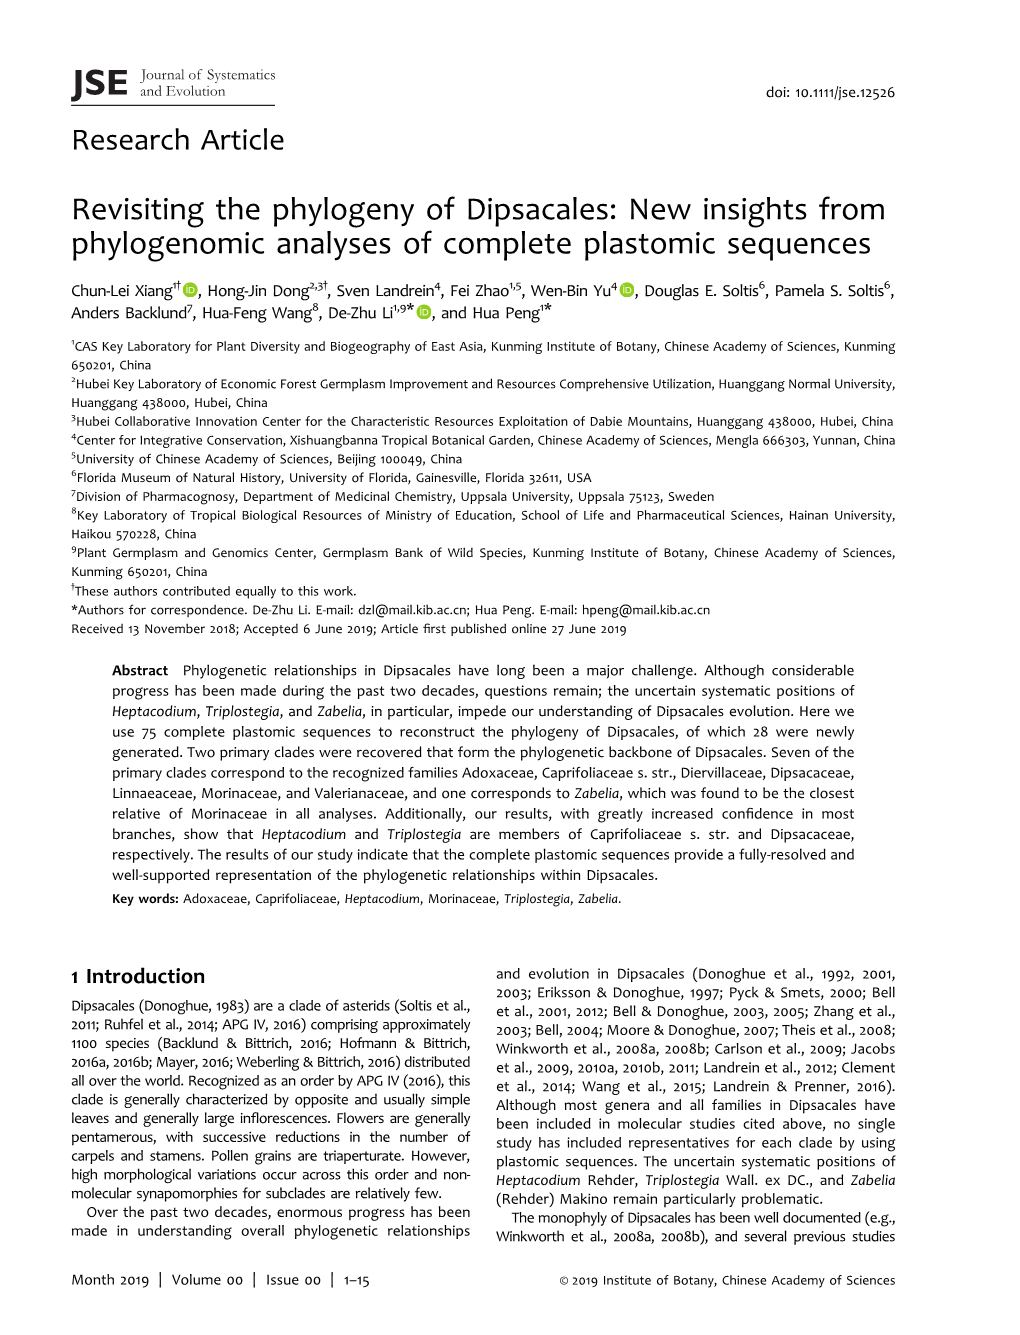 Revisiting the Phylogeny of Dipsacales: New Insights from Phylogenomic Analyses of Complete Plastomic Sequences